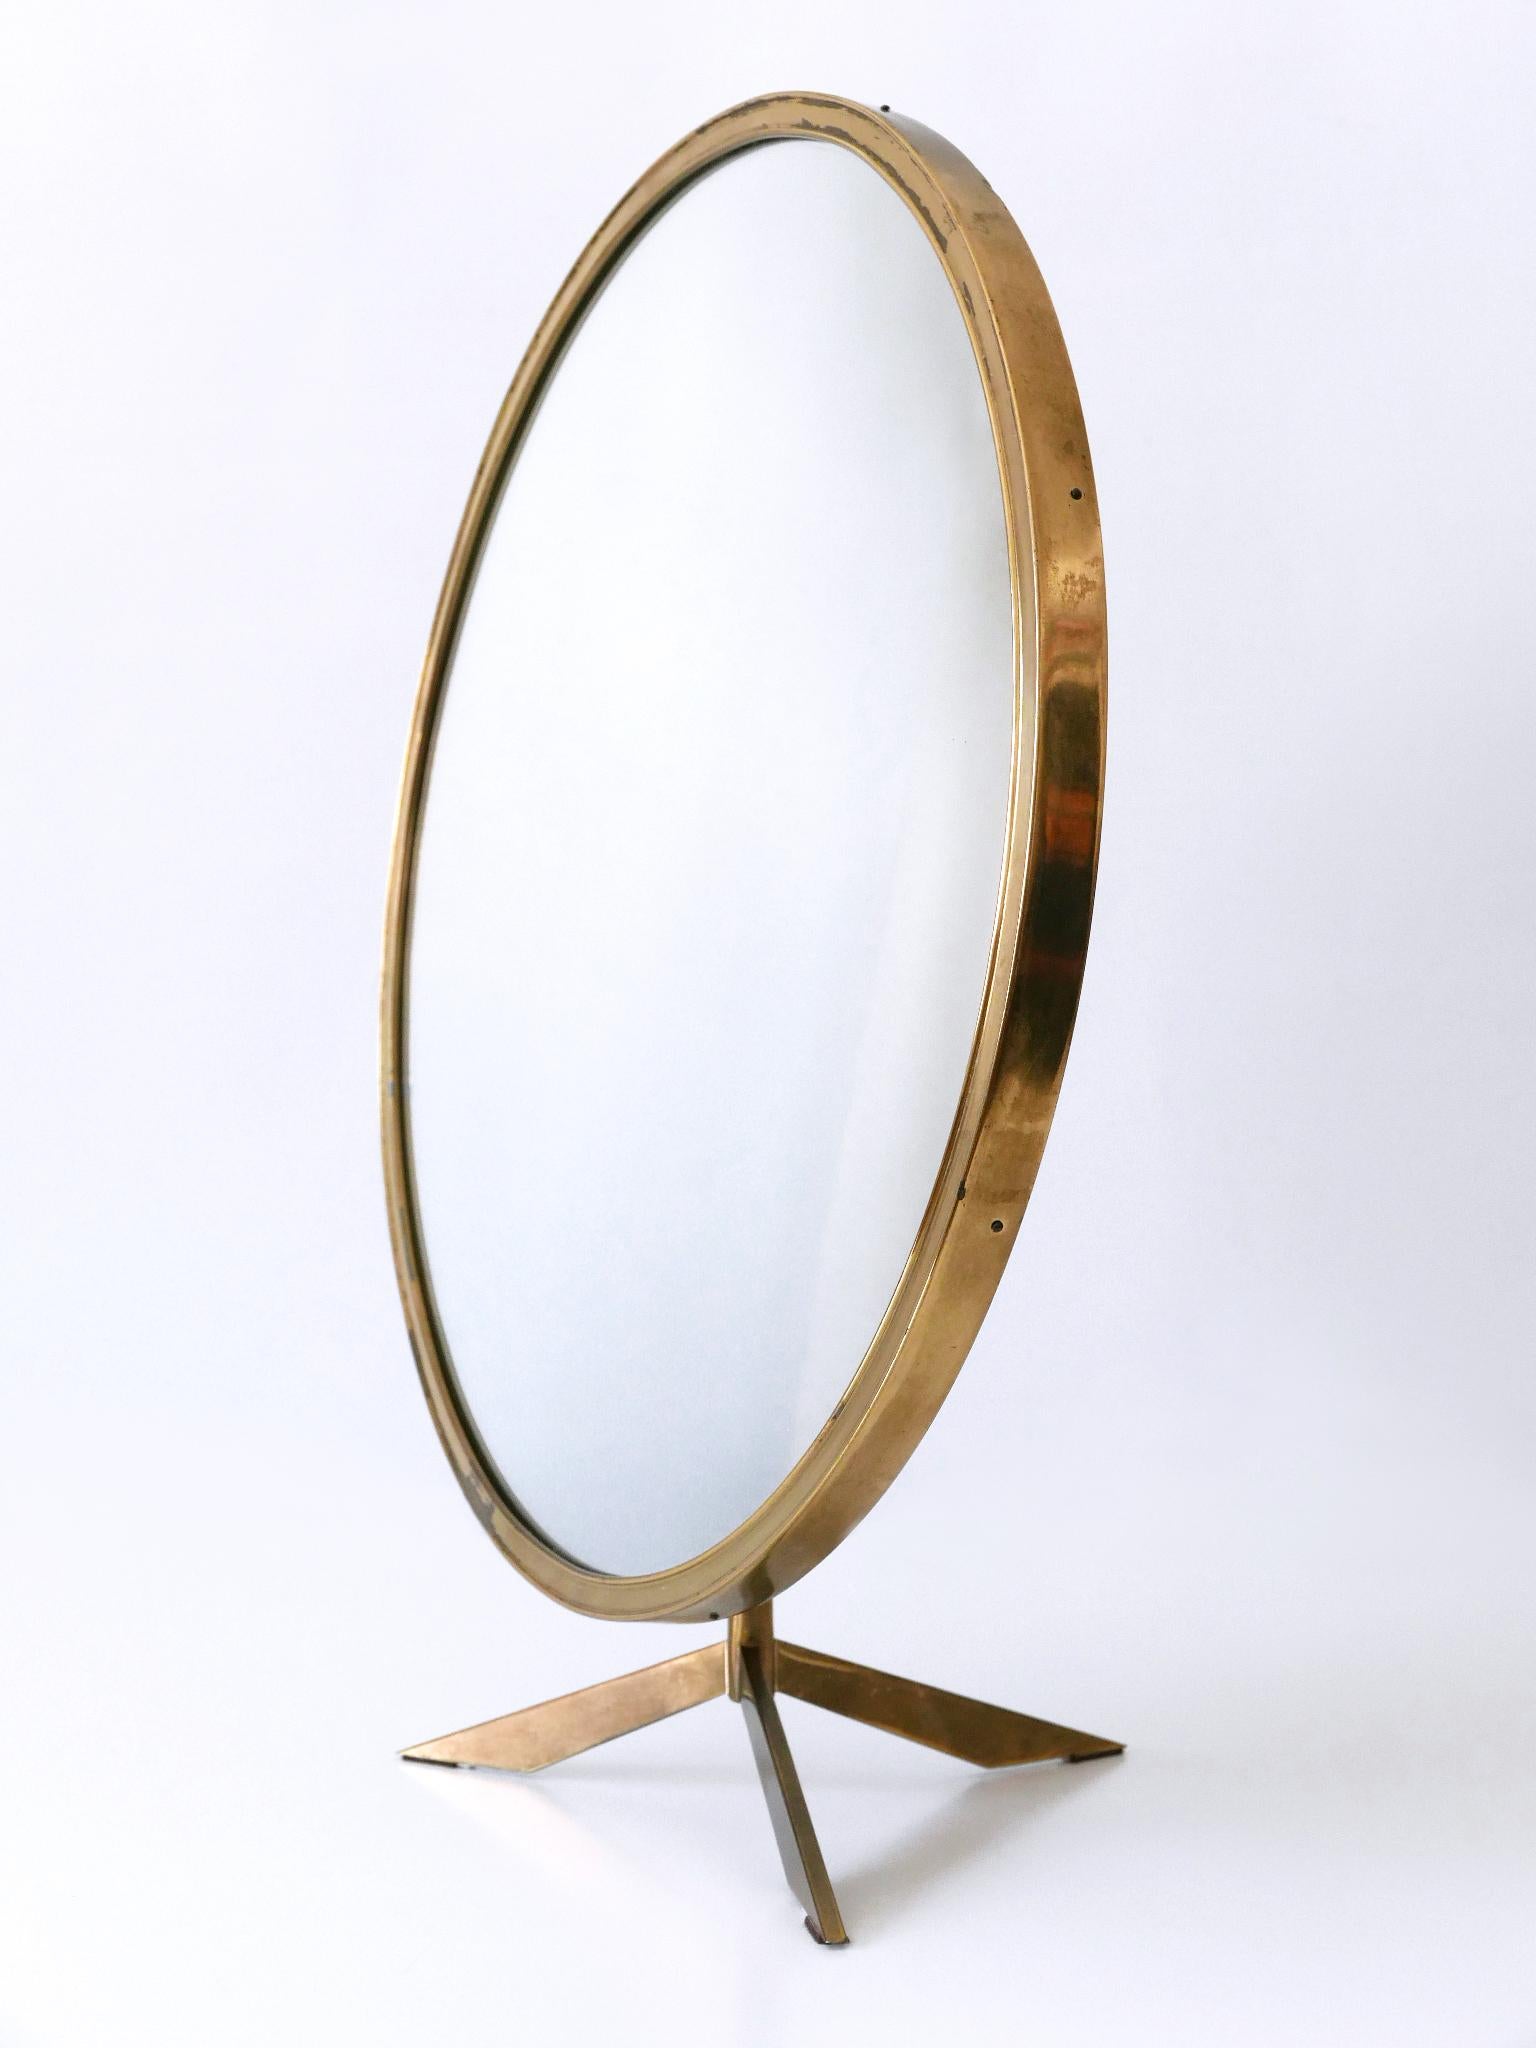 Elegant Mid-Century Modern Wall or Vanity Mirror by Zierform Germany 1950s For Sale 7